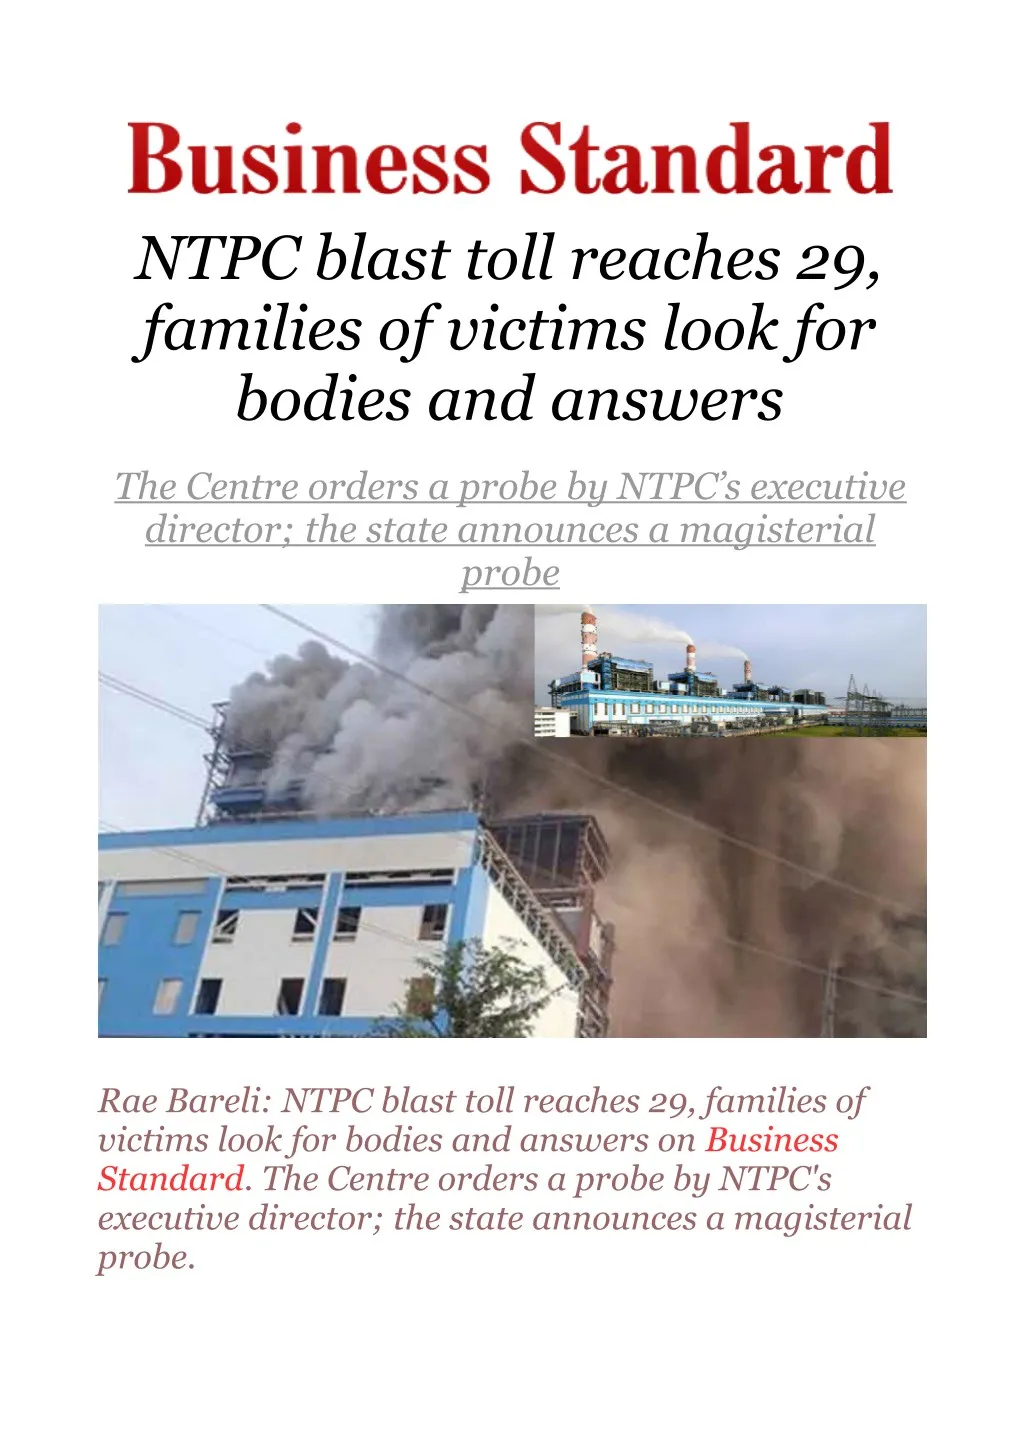 ntpc blast toll reaches 29 families of victims